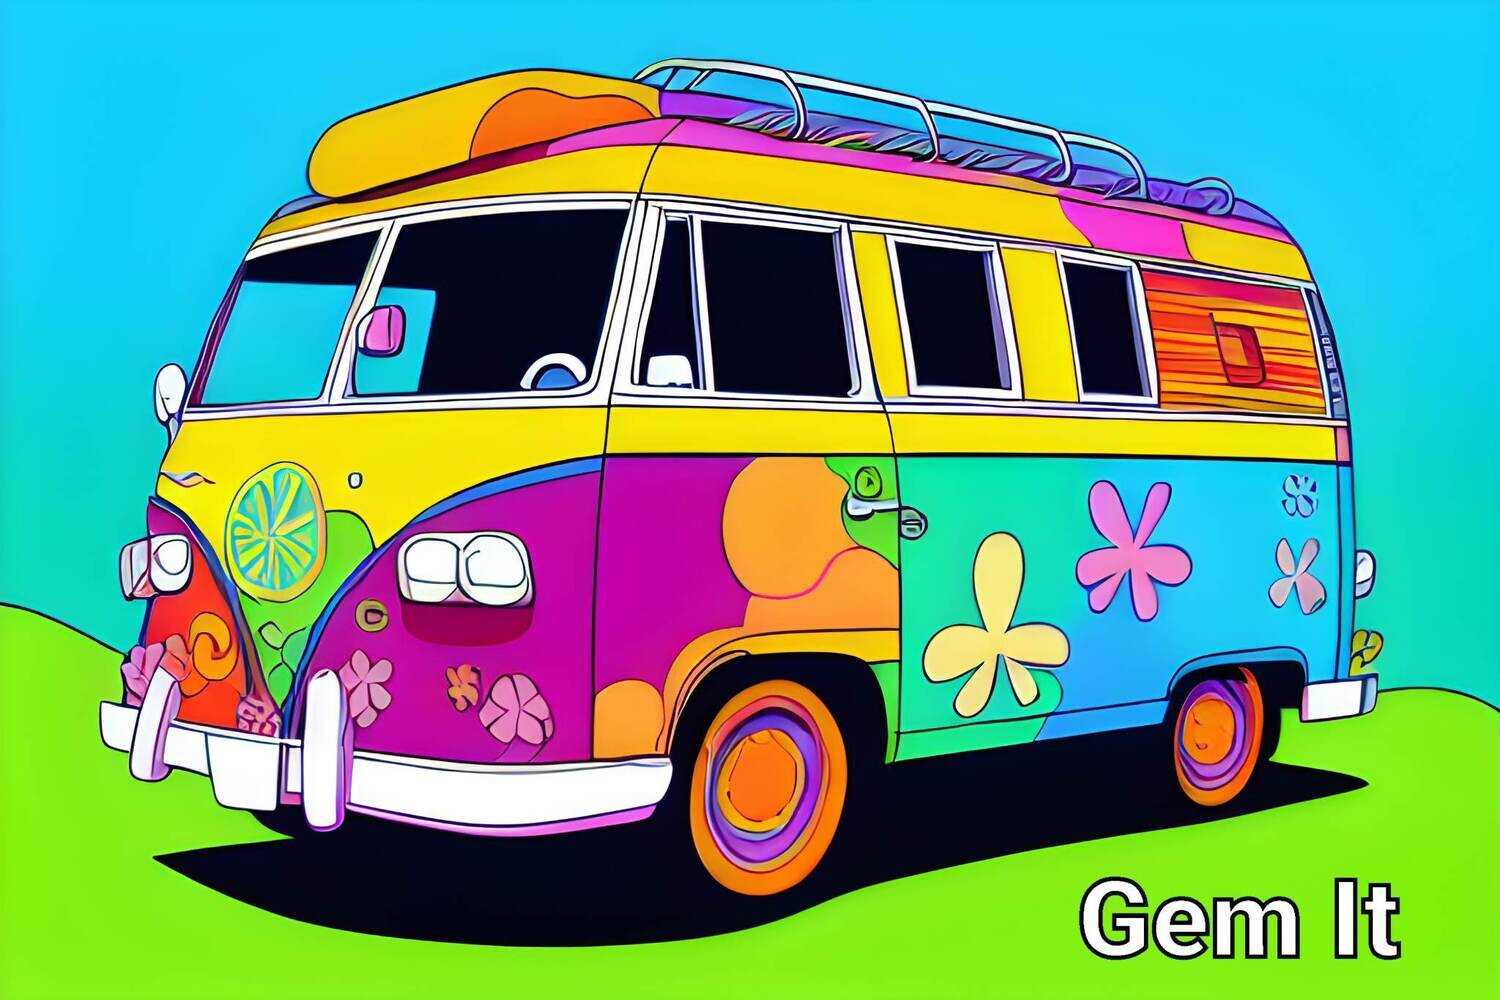 Campervan 1029 - Specially ordered for you. Delivery is approximately 4 - 6 weeks.